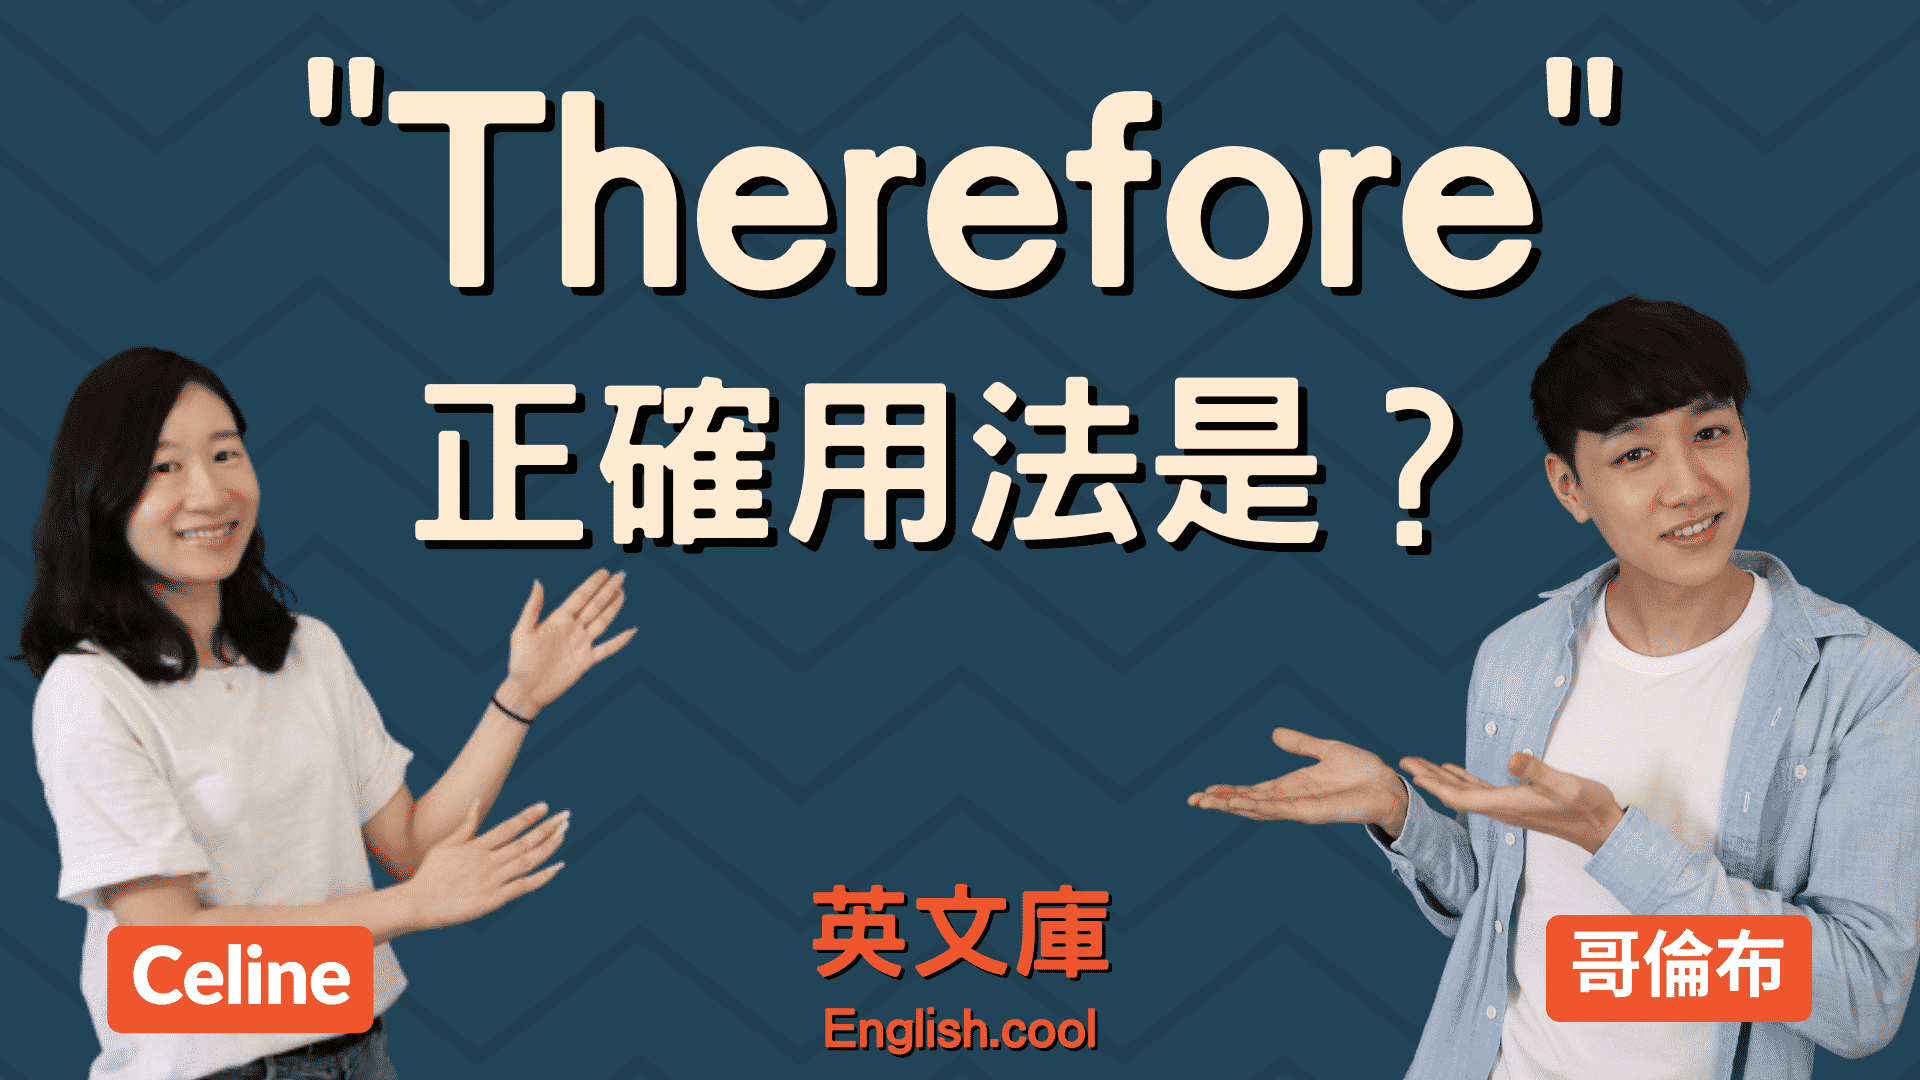 You are currently viewing 「因此」的英文 “Therefore” 的正確用法是？（含例句）